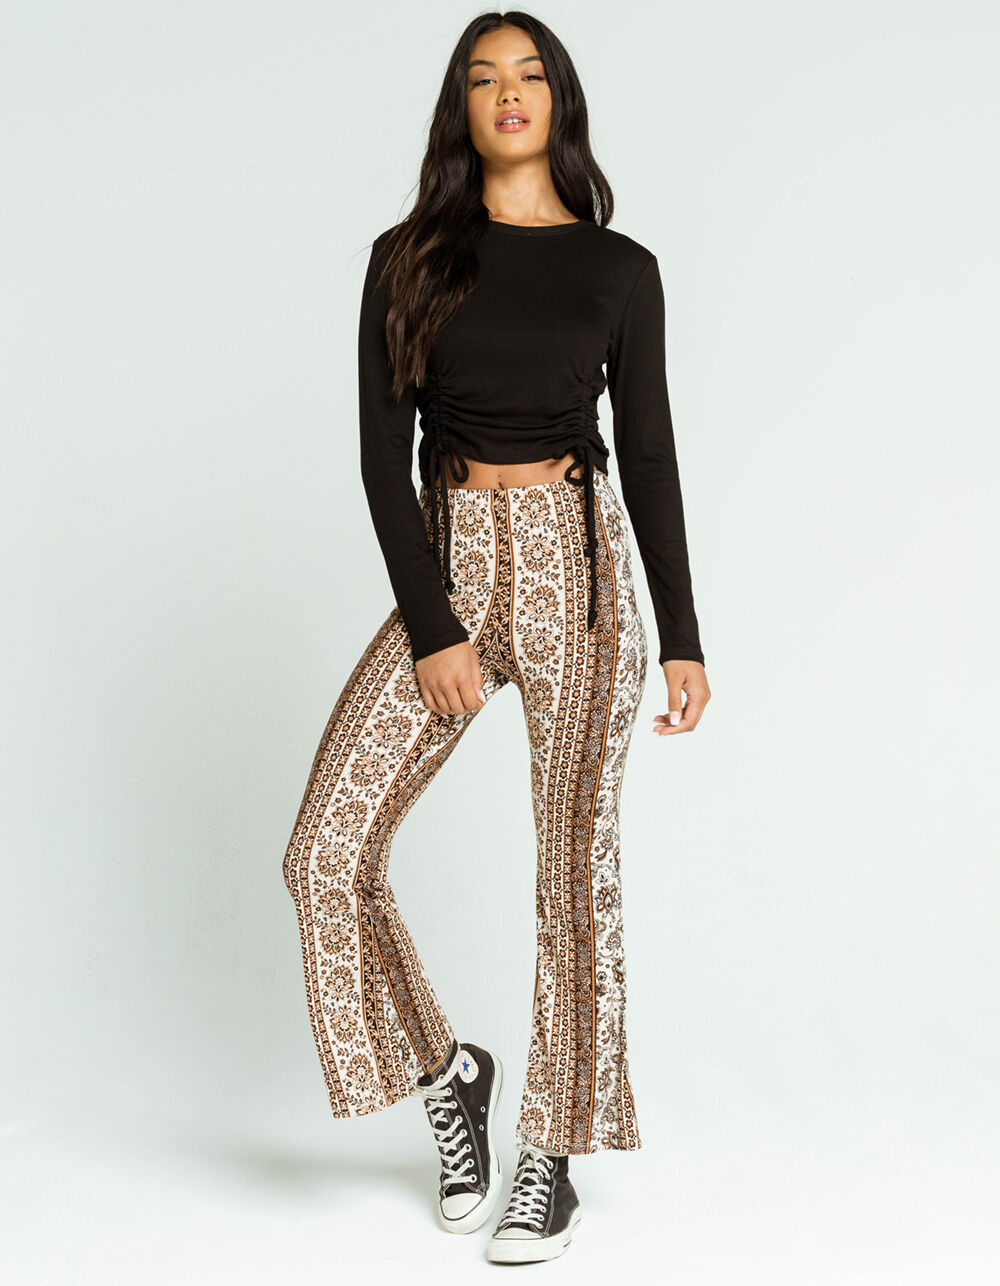 WEST OF MELROSE All Is Flare Womens Pants - MULTI | Tillys